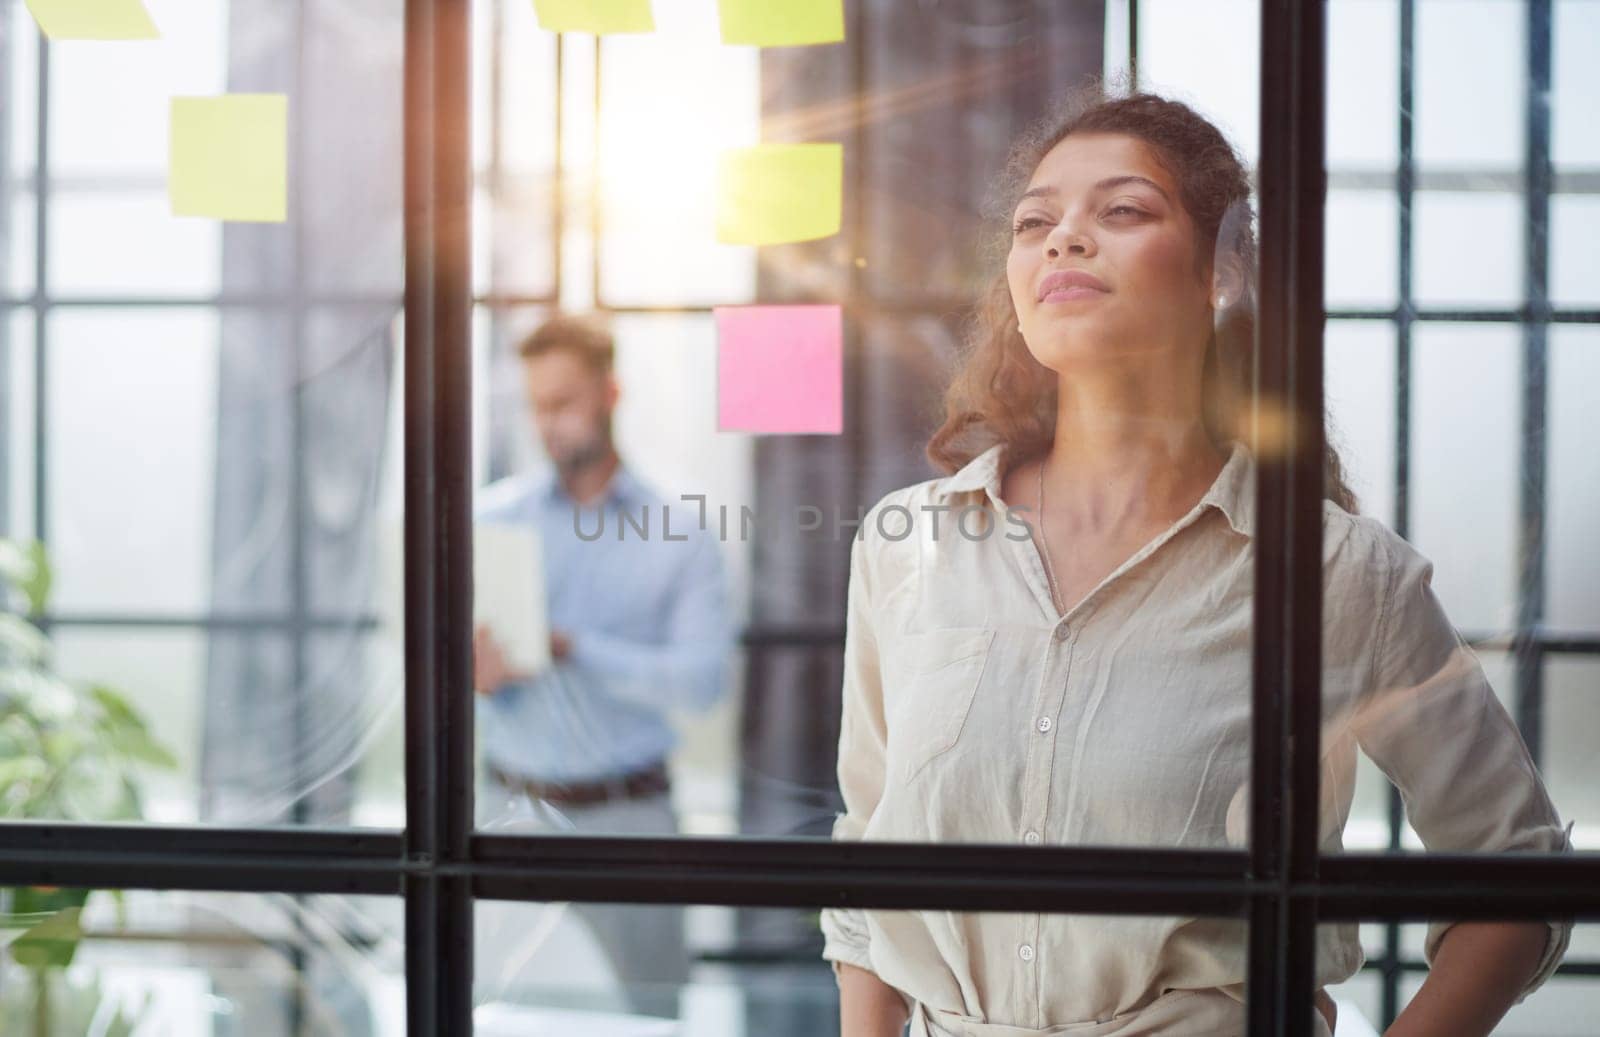 Bringing her vision to life. Shot of a confident businesswoman presenting an idea to her colleague using adhesive notes on a glass wall in the office.